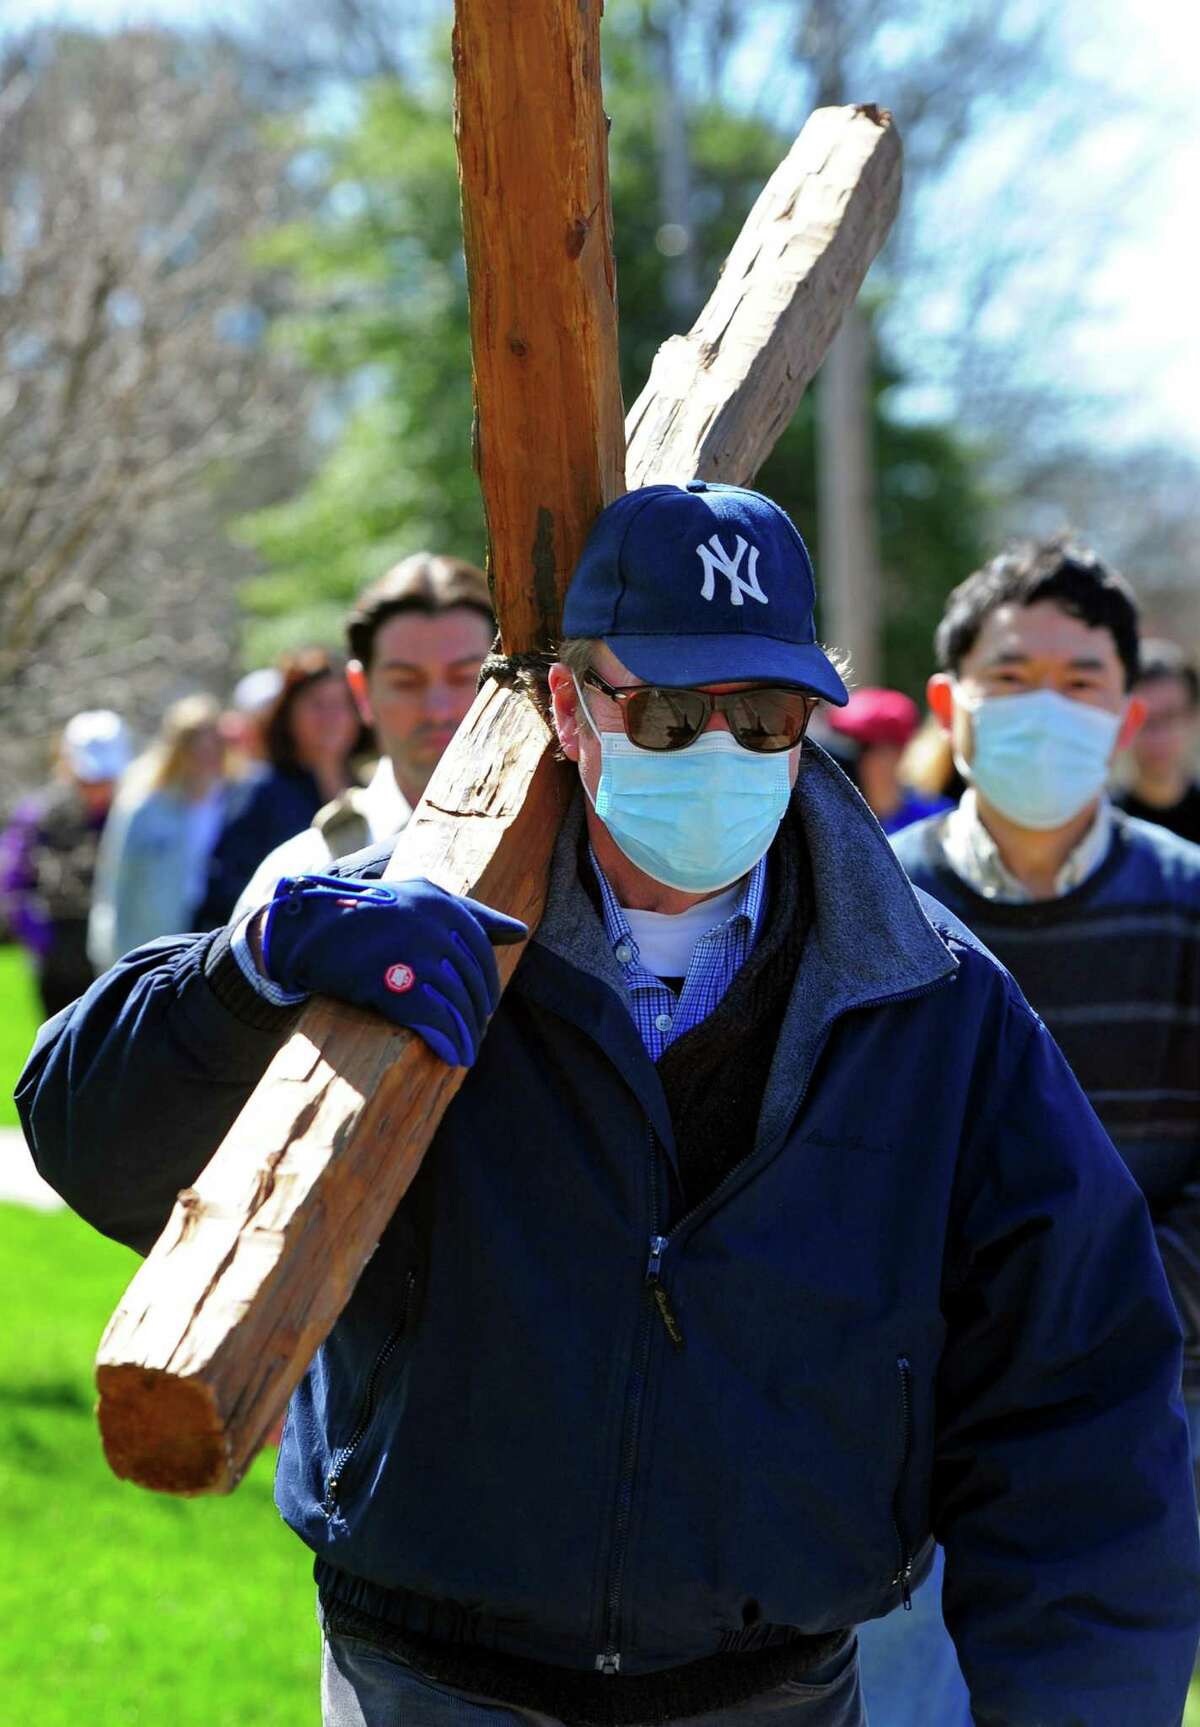 Steve Knowles first volunteers to carry a roughly hewn wooden cross with congregants from the First Congregational Church of Darien and St. Luke's Darien Parish, who gathered to walk with the cross along Post Road on Good Friday in Darien, Connecticut, Friday, April 15, 2022. About 50 people walked 13 stops along the route that represent the 13 stations of the cross.  The prayers read at each stop were tailored to each location, such as one for the fire department and one for the train station.